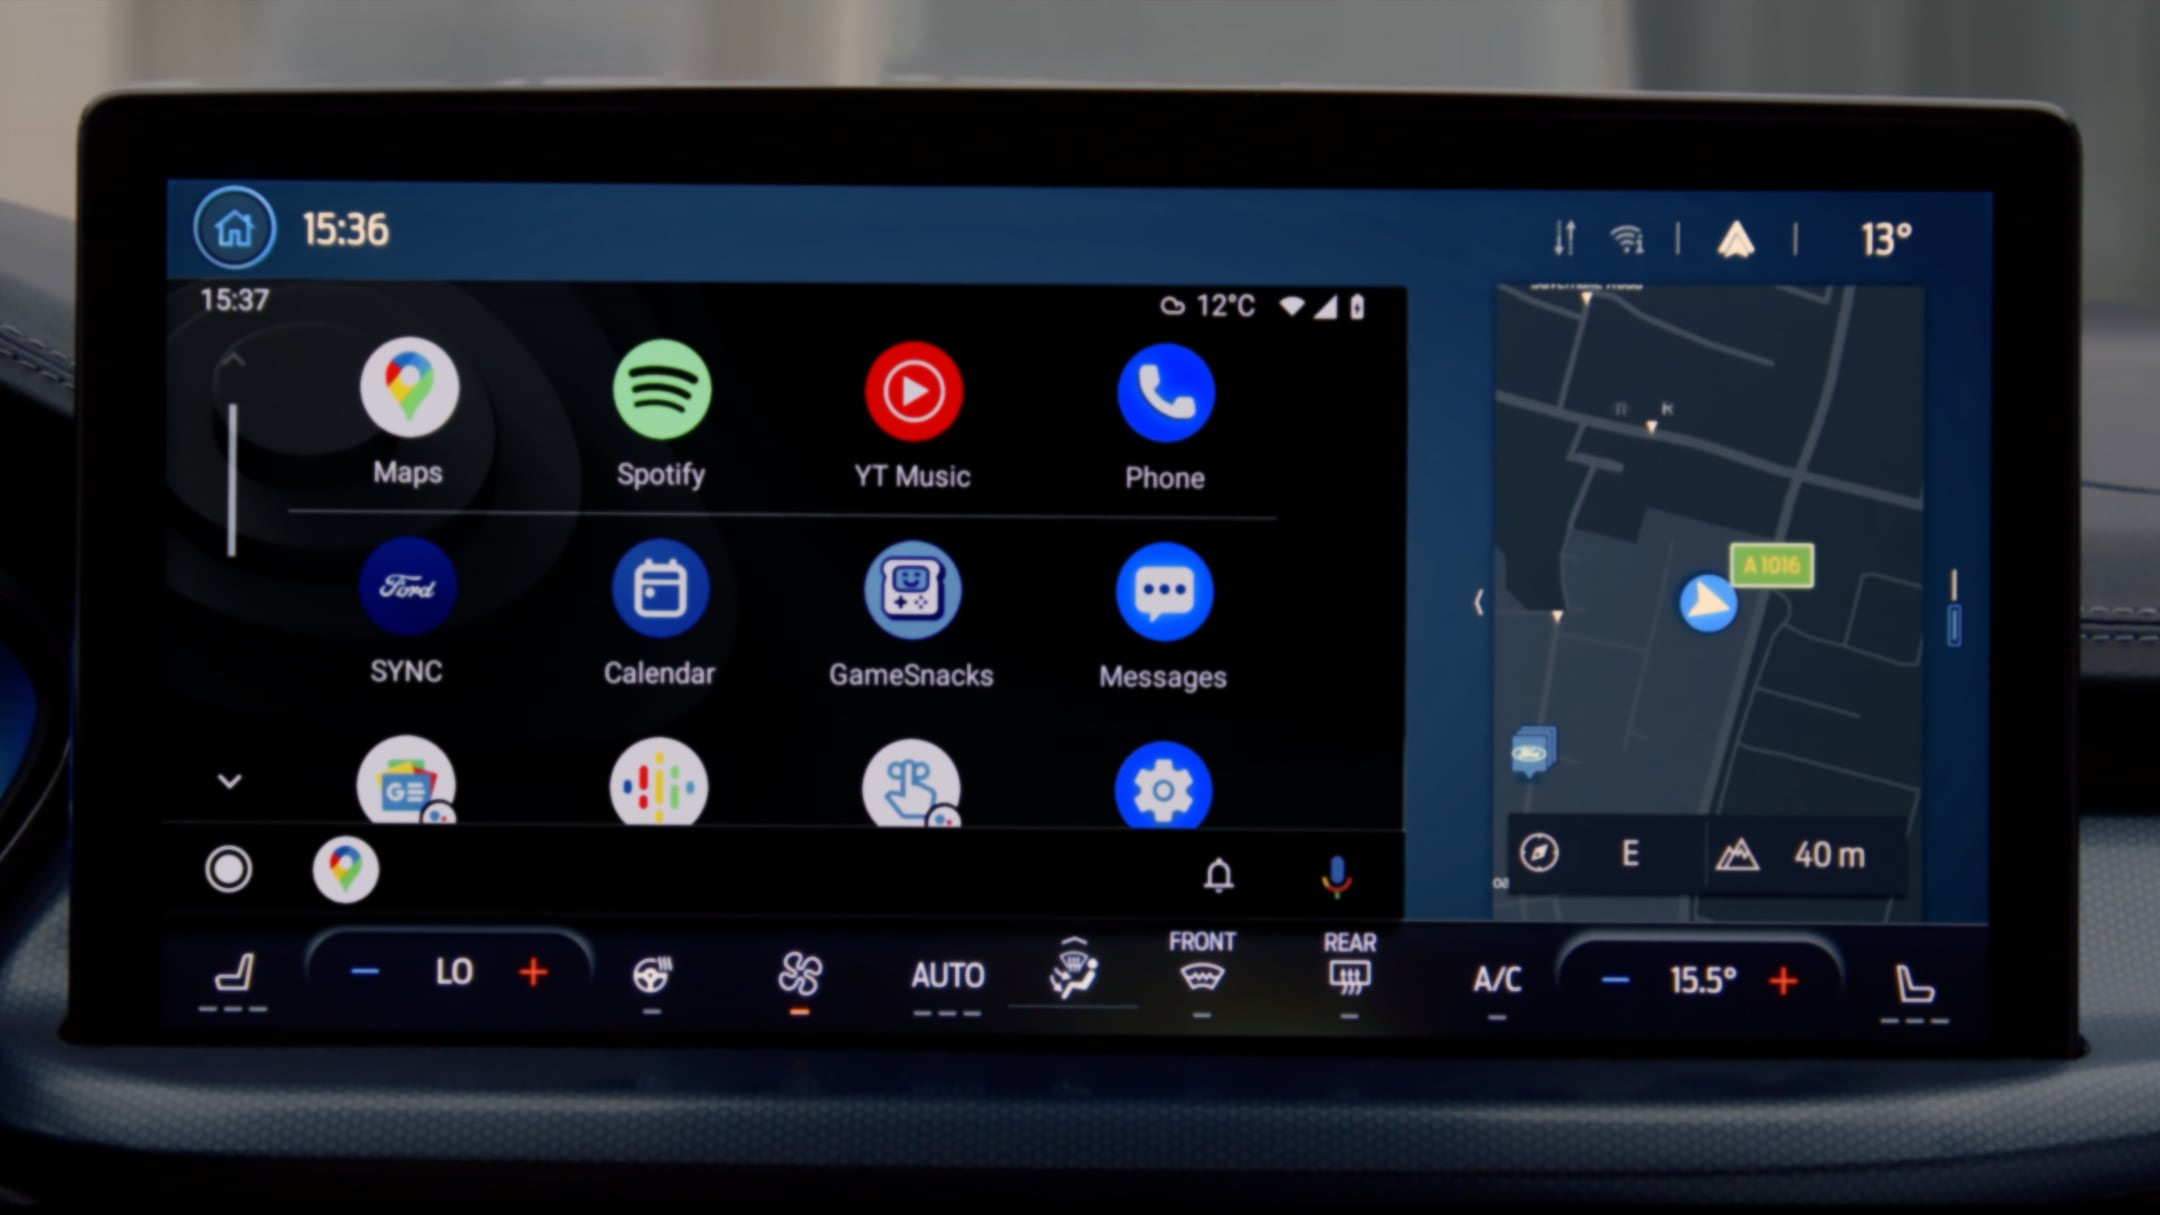 Screen inside a car showing a menu with apps